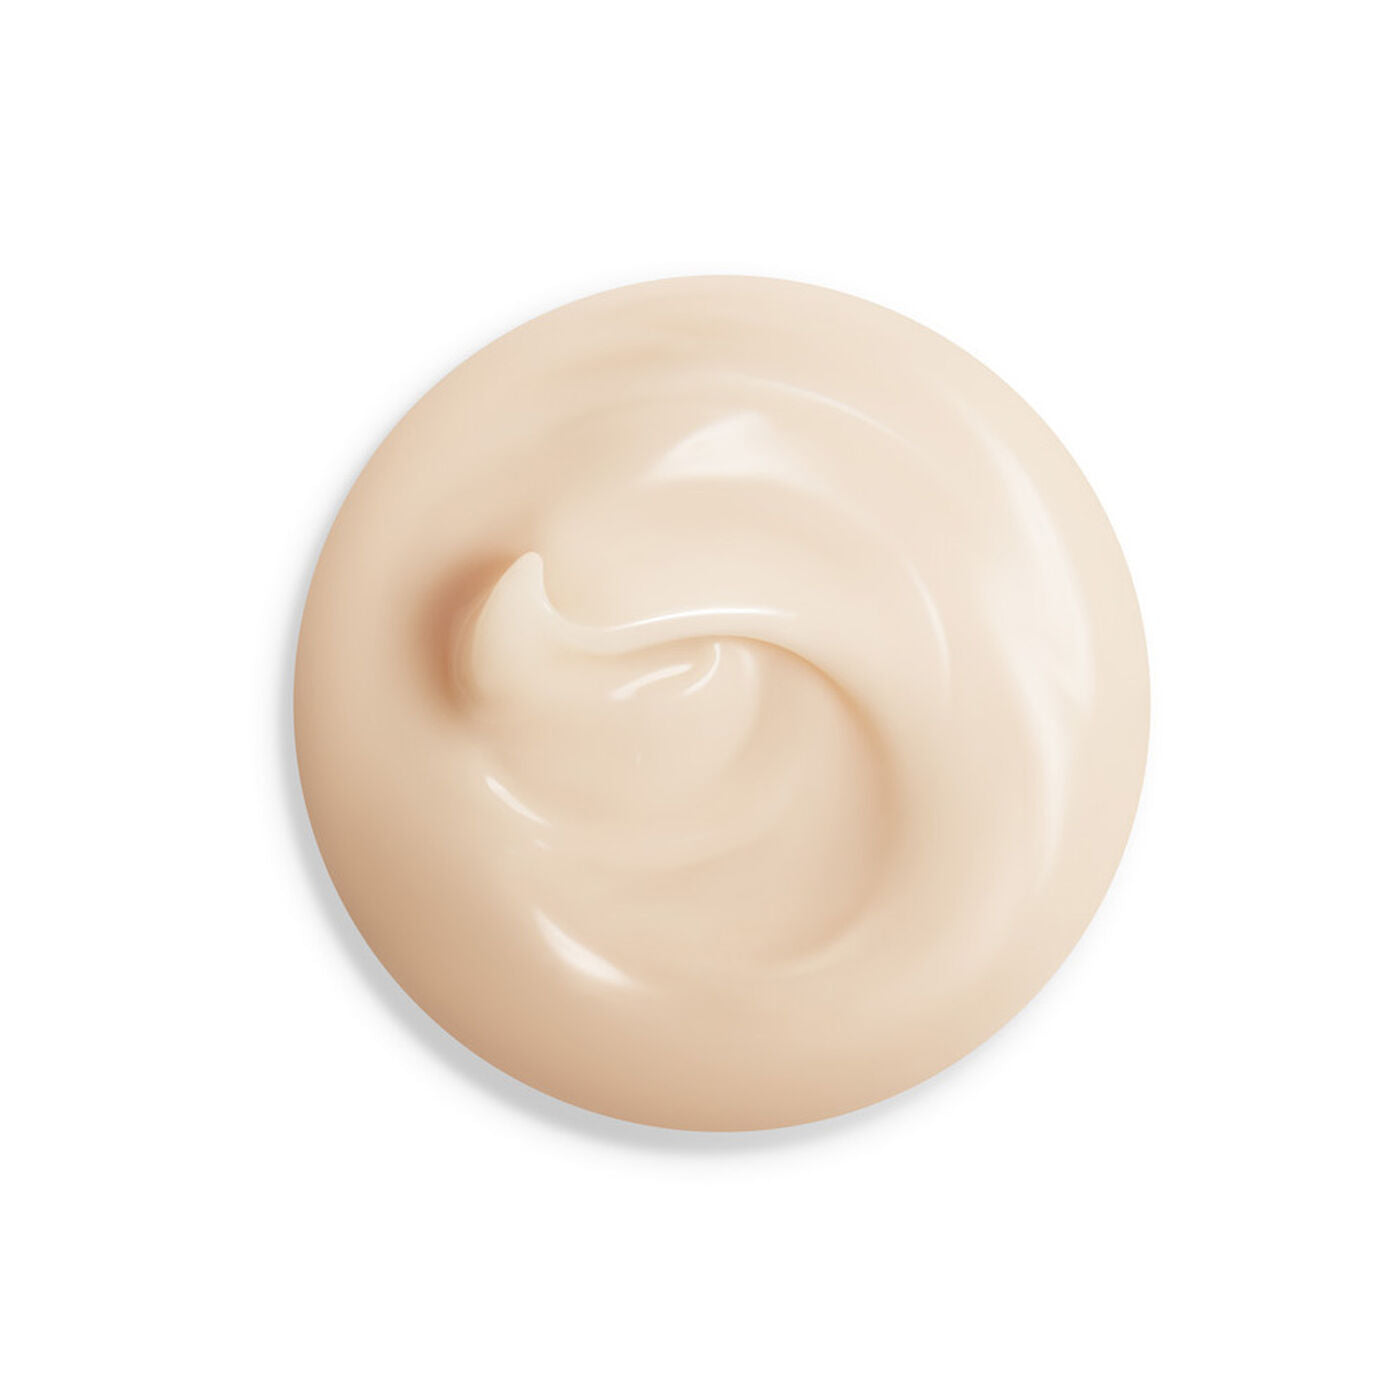 Shiseido VITAL PERFECTION Uplifting and Firming Cream Enriched 50mL